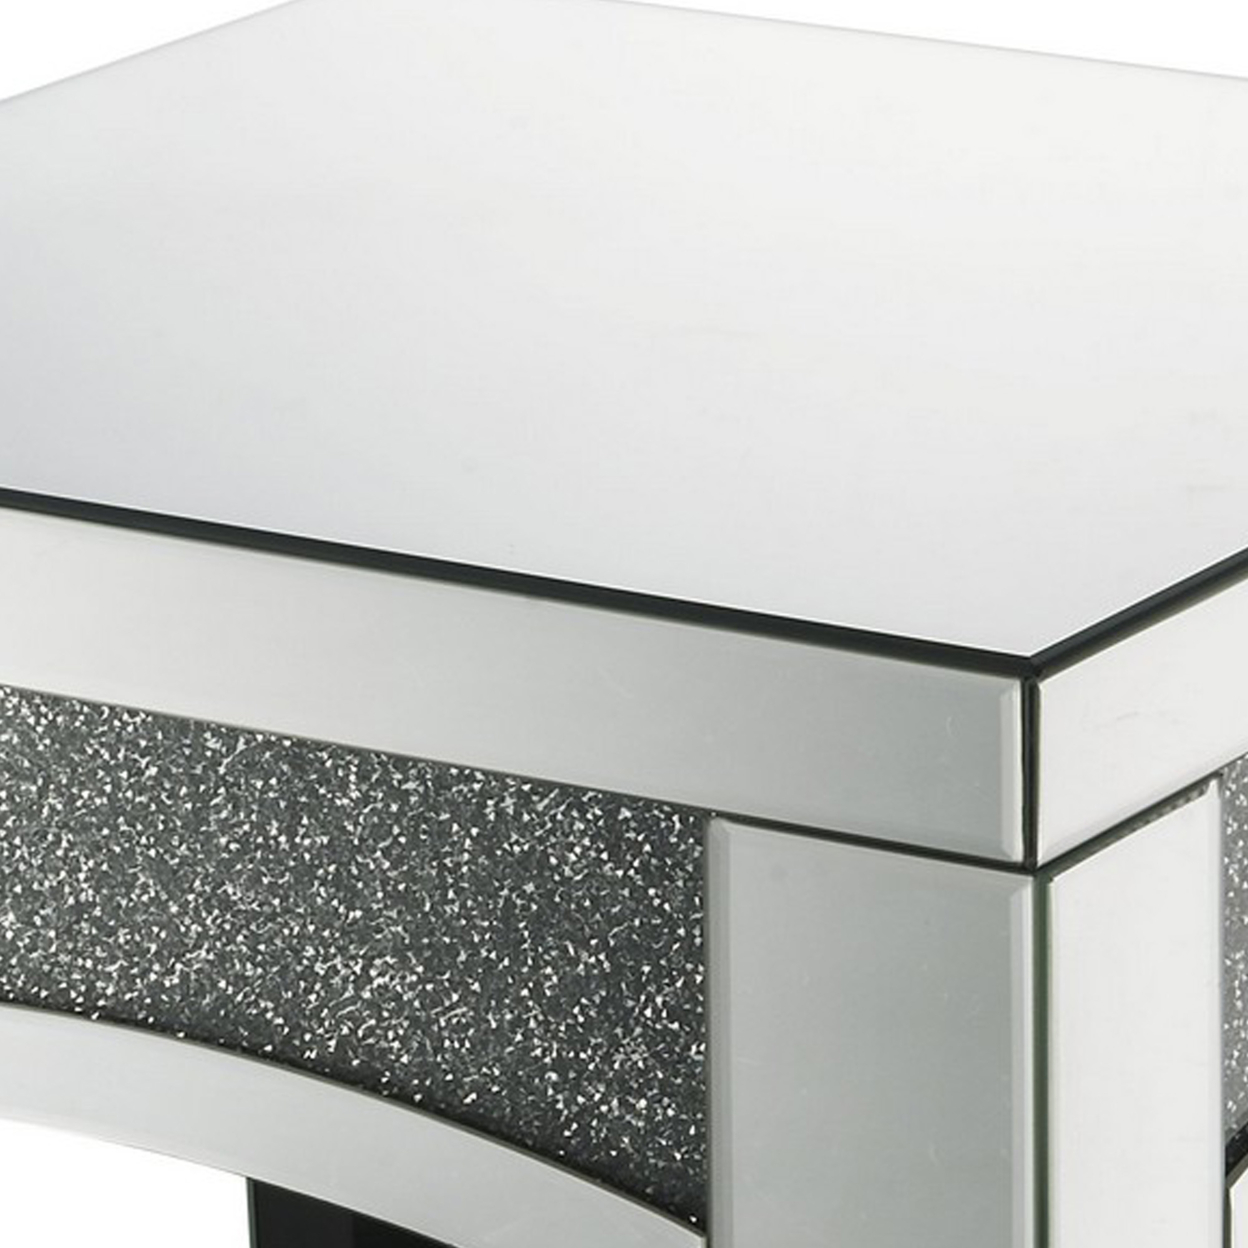 End Table With Mirror Trim And Faux Stone Inlays, Silver- Saltoro Sherpi